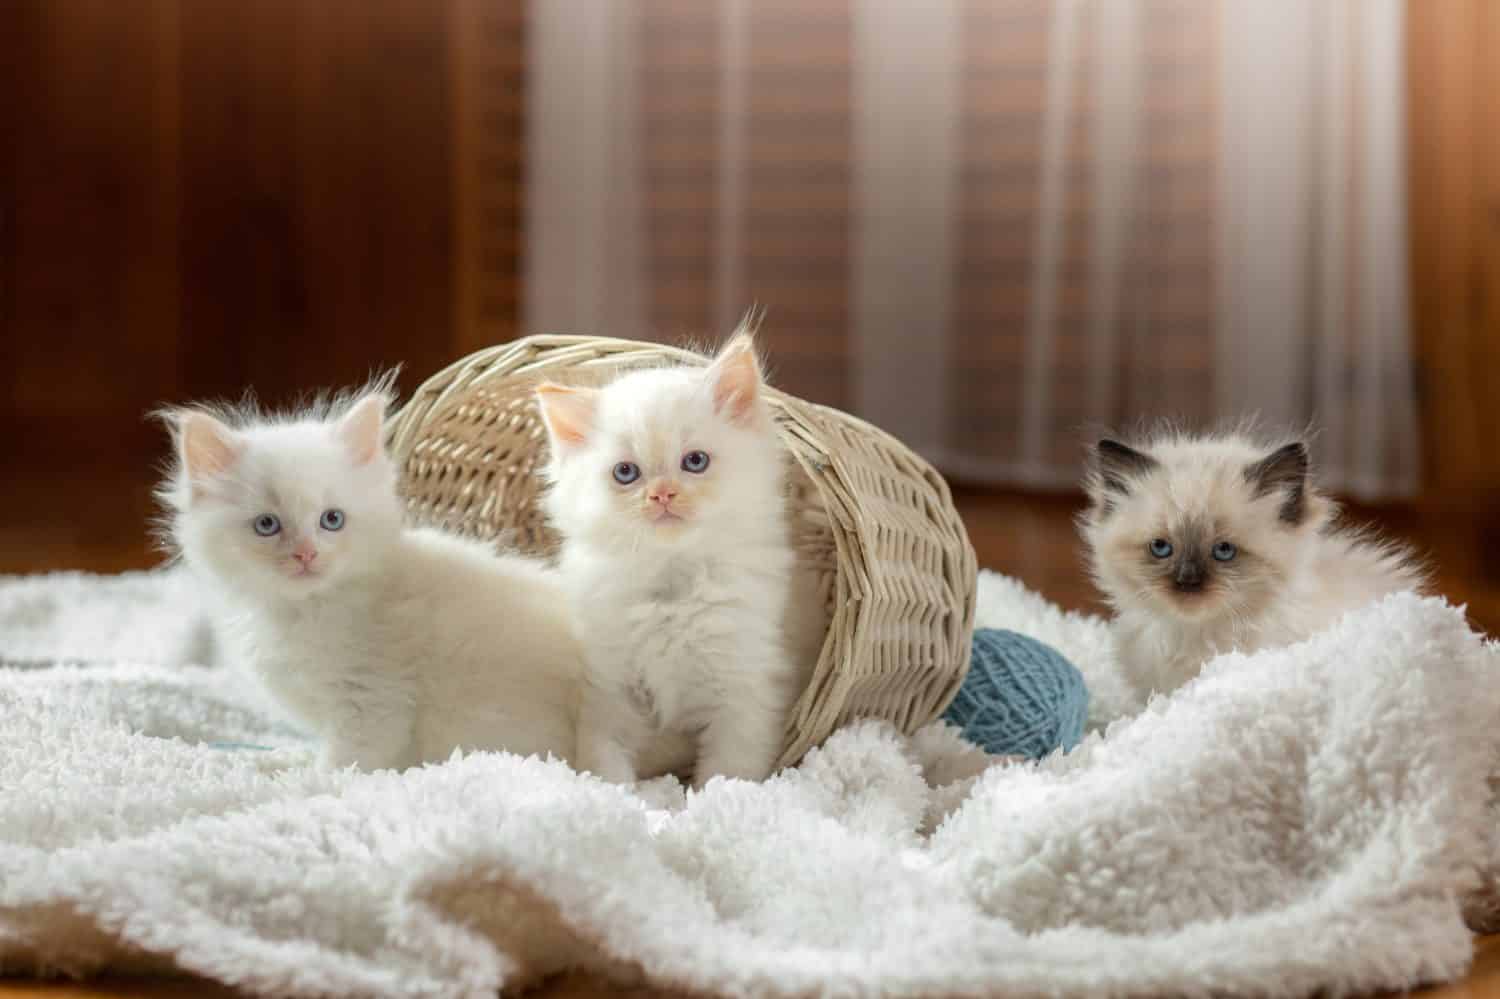 fluffy three kittens on white in a plaid. Bicolor Rag Doll Cat with blue ball